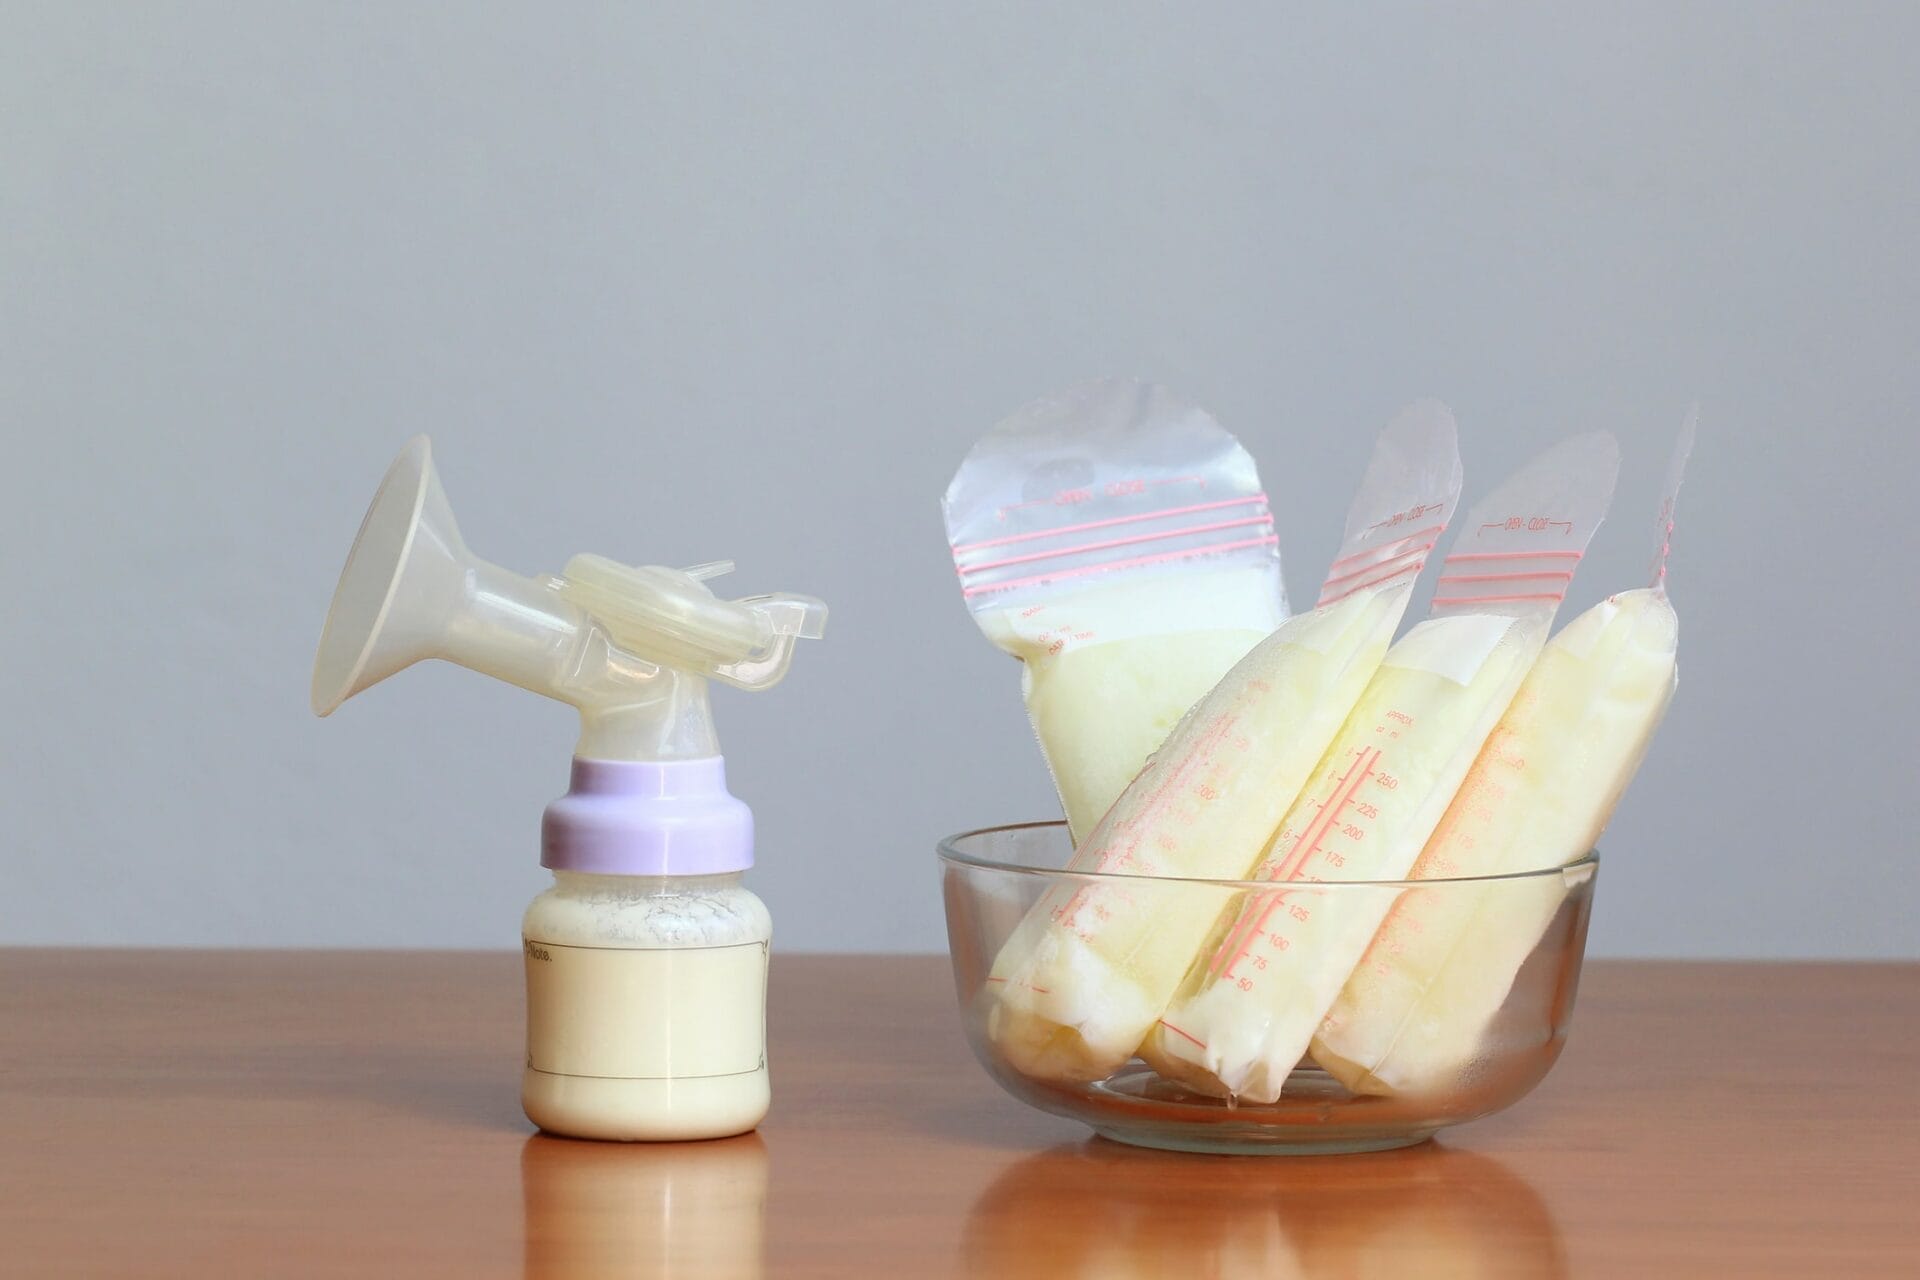 Everything You Should Know About Breast Milk Storage